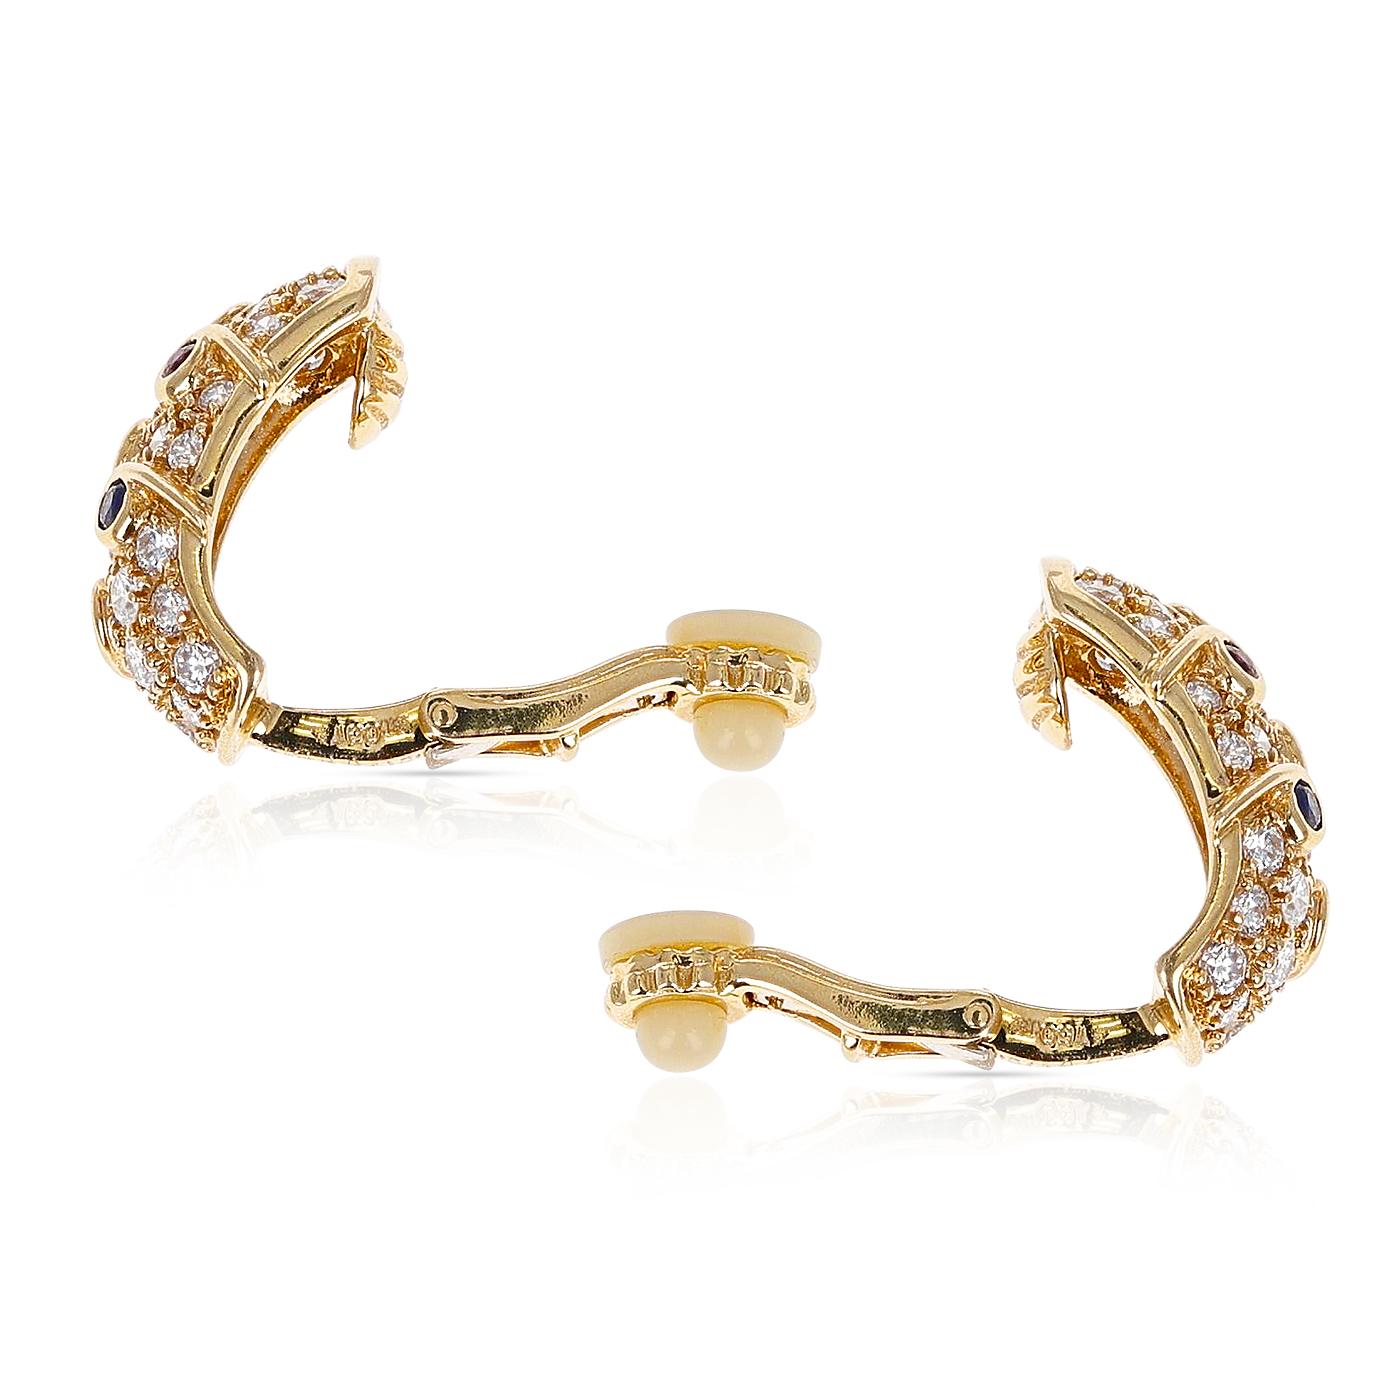 A pair of Cocktail Earrings with Diamonds, two Rubies, One Emerald, Two Sapphires each made in 18 Karat Yellow Gold. The total weight of the stones is 1.79 carats. The earrings are clip-ons. The length is 0.60 inches. The total weight is 10.70